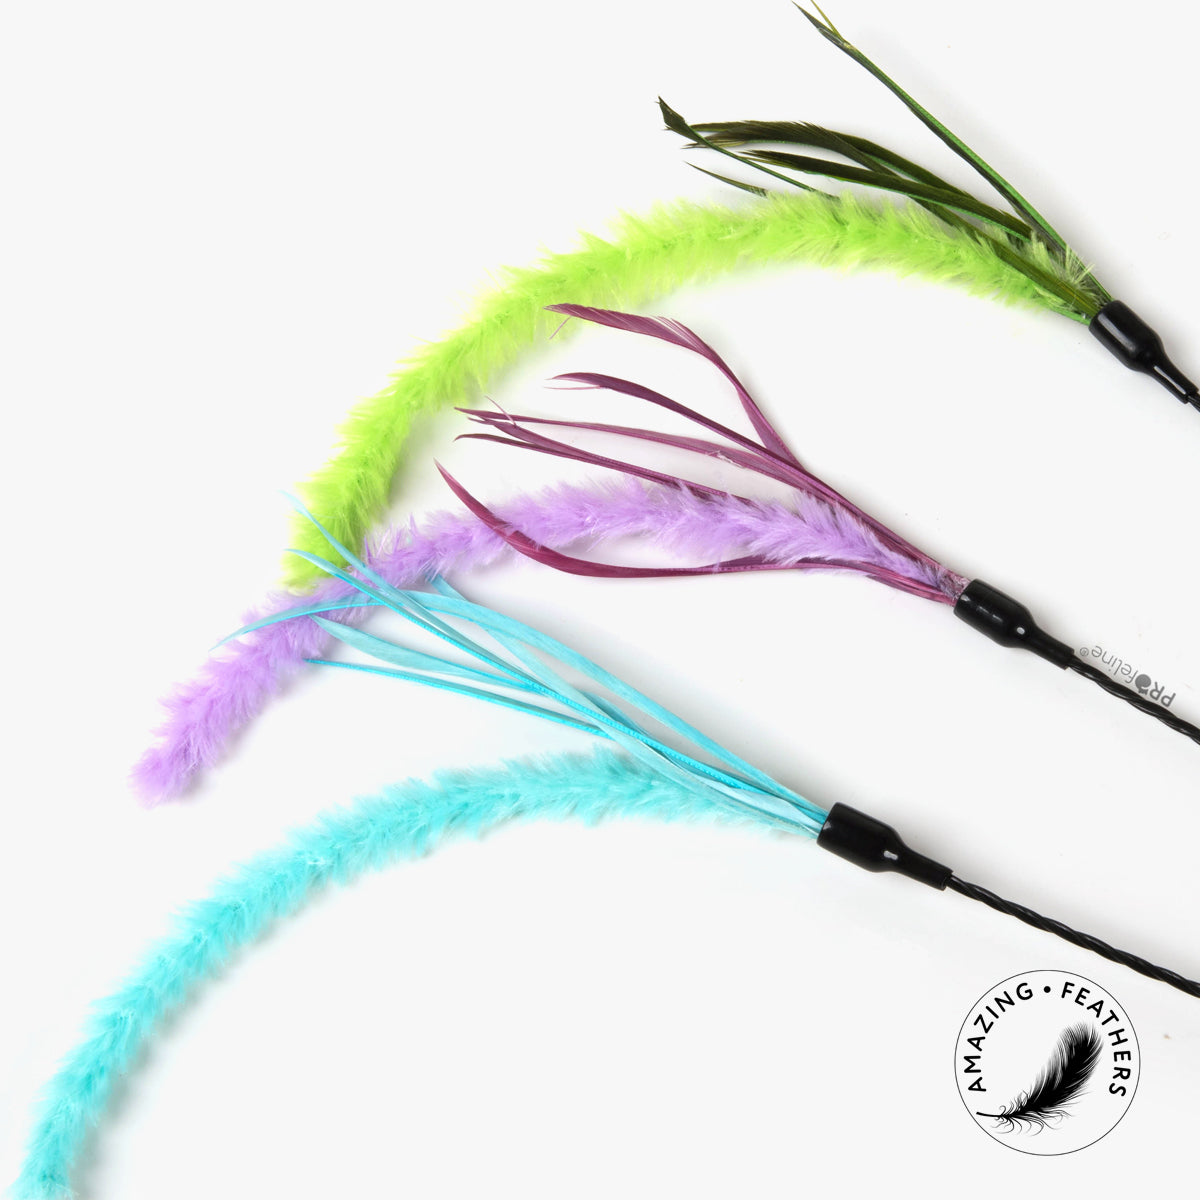 Profeline Pipe Wiper Feather Cat Teaser Toy | at Made Moggie